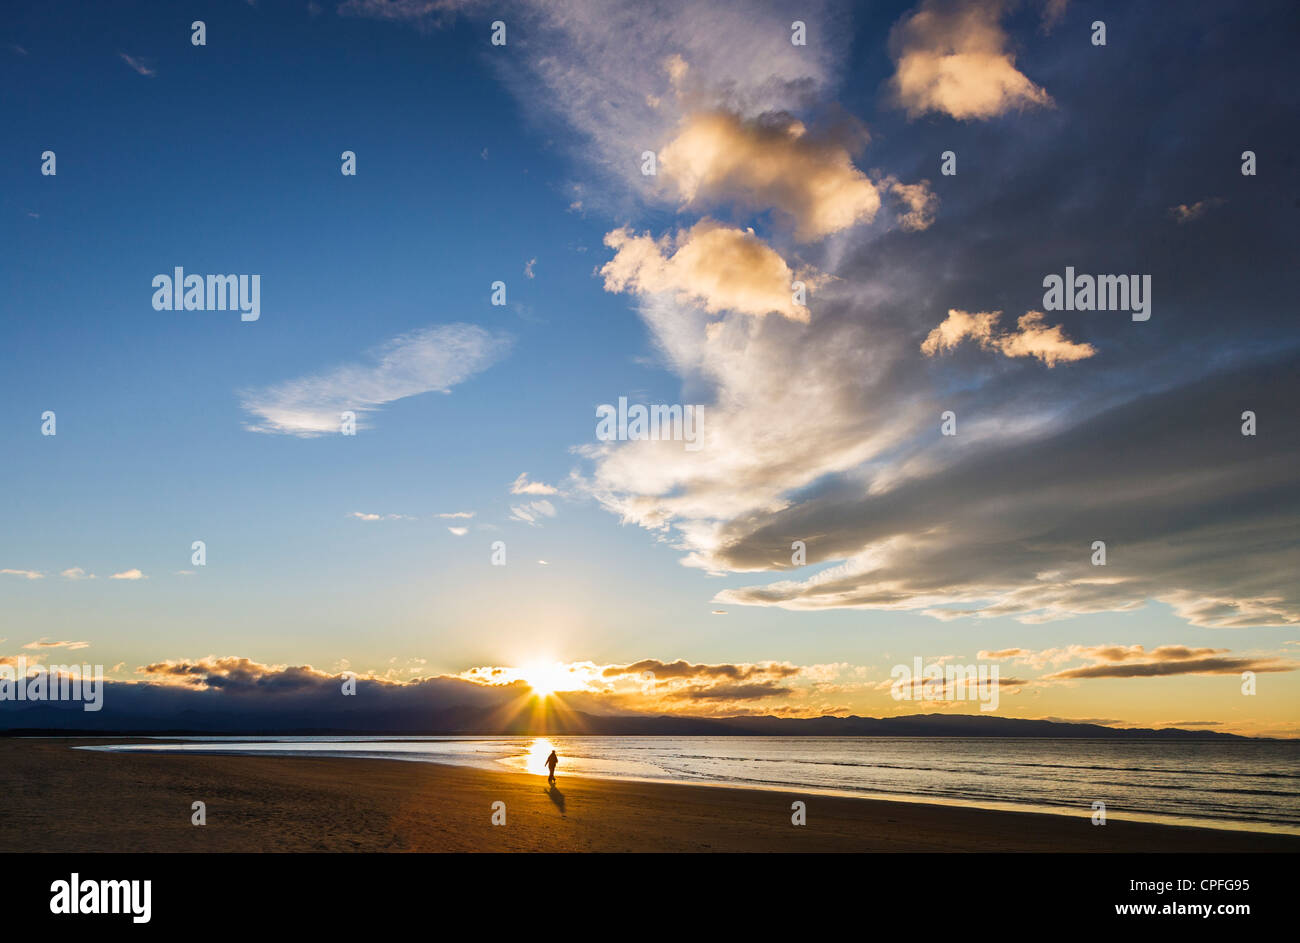 Tahuna Beach, Nelson Bay, New Zealand. Person walking on beach at edge of sea just as sun disappears behind mountains. Stock Photo